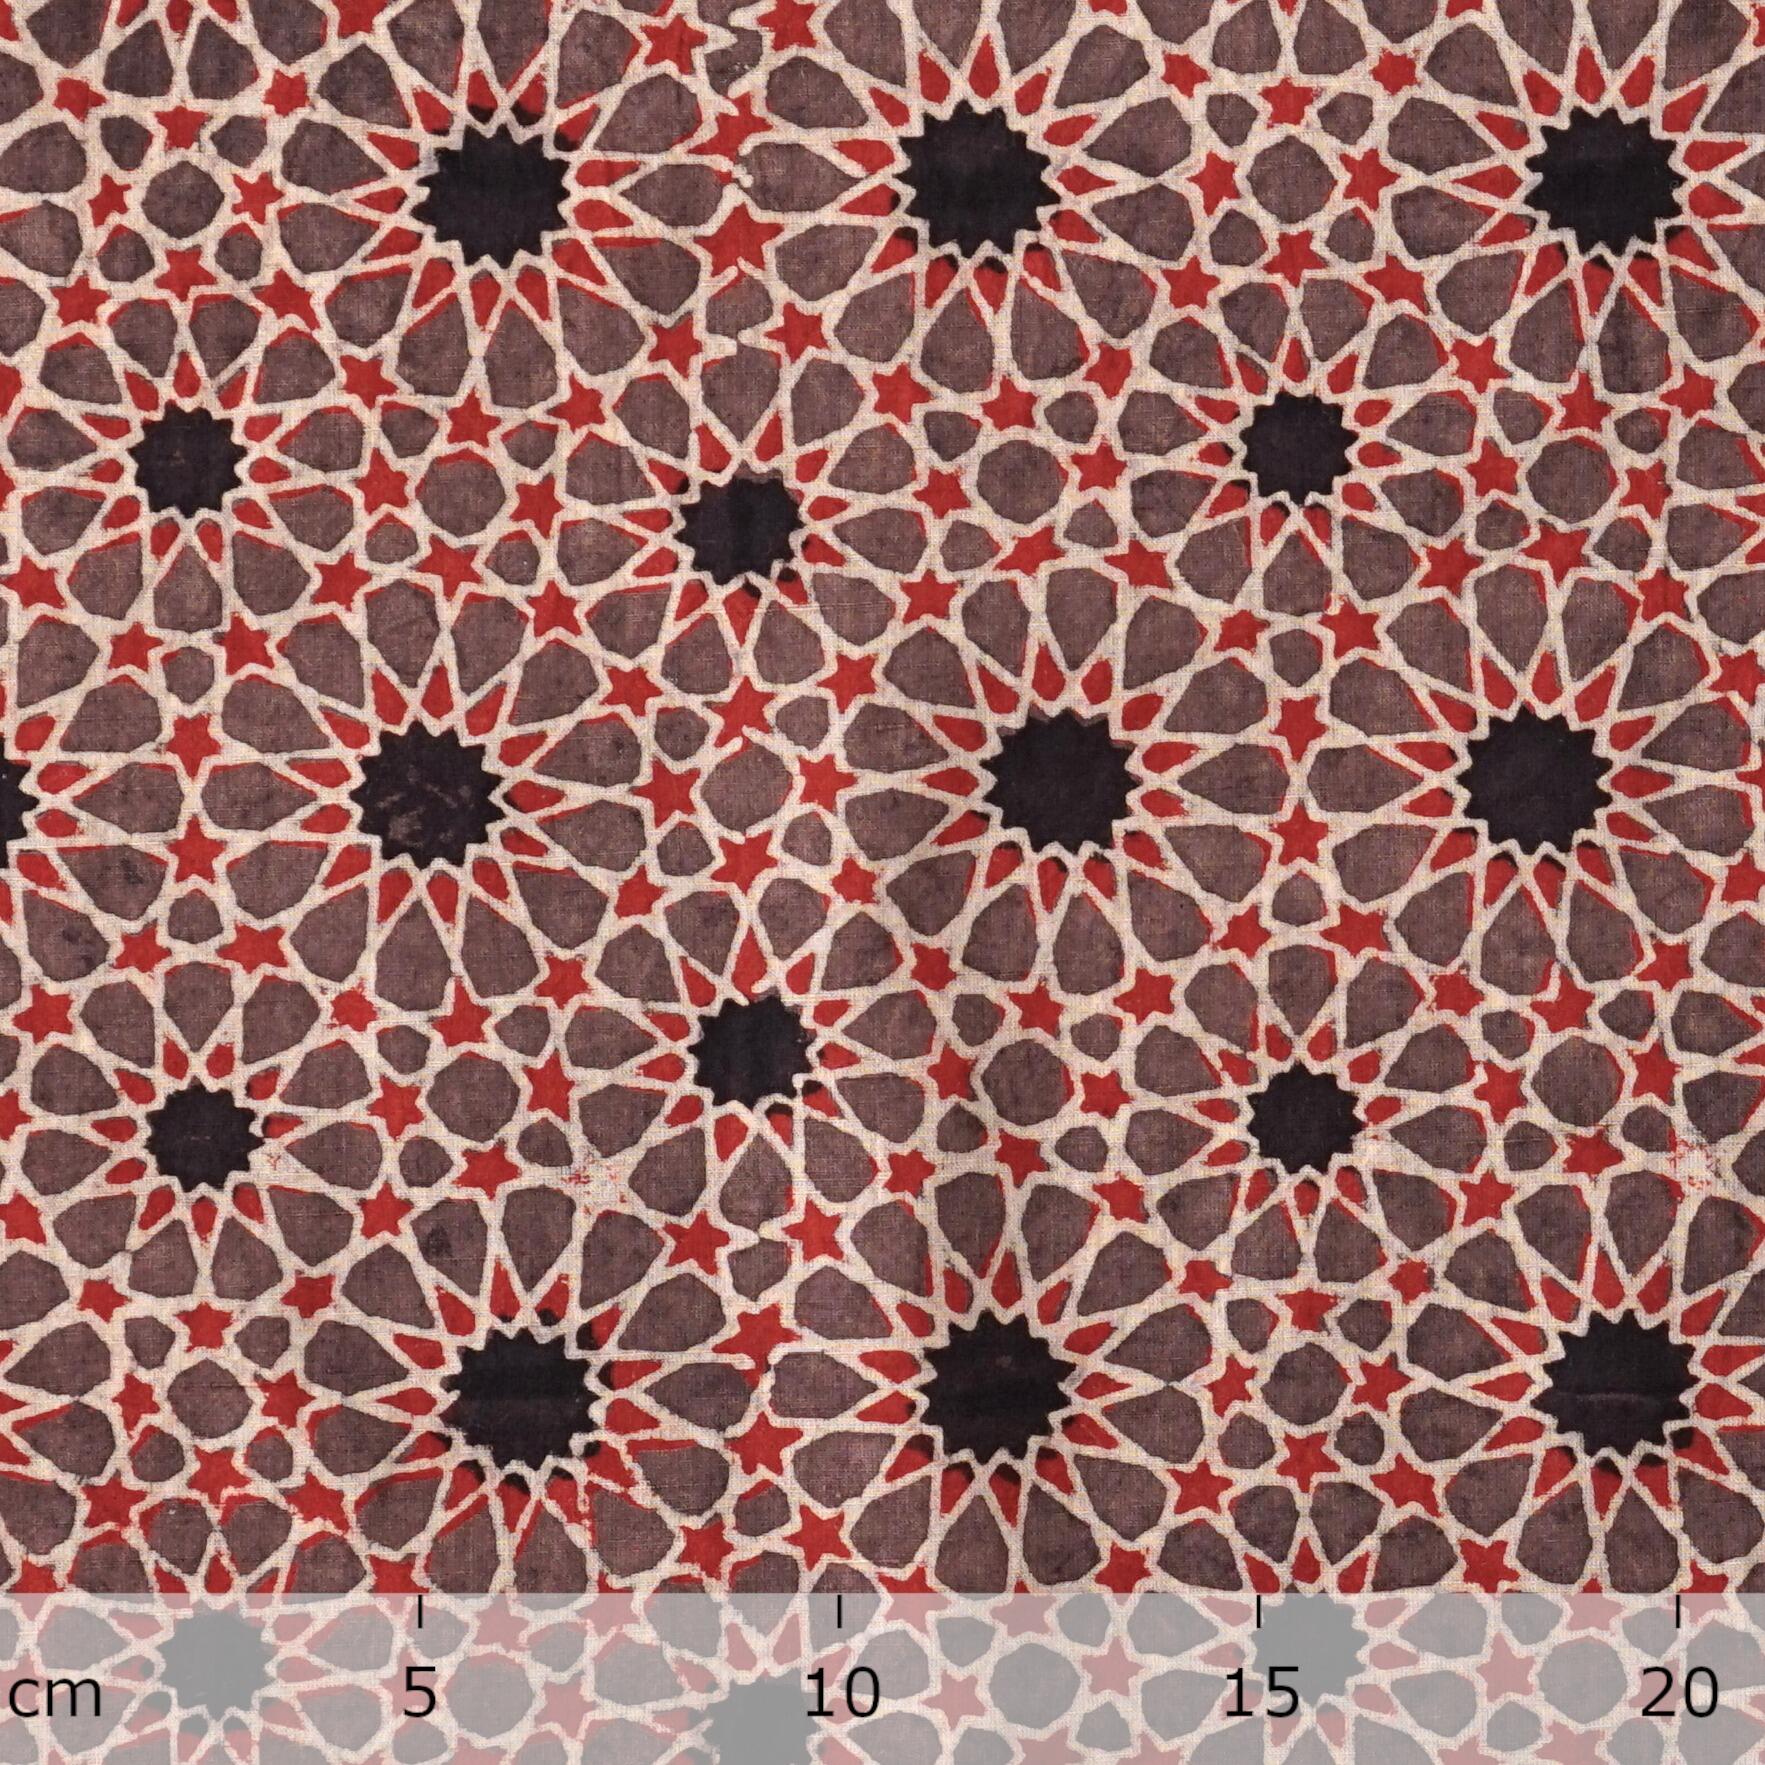 SIK12 - Block-Printed Cotton Fabric From India - Fireworks Motif - Black Iron and Red Alizarin Dye - Ruler